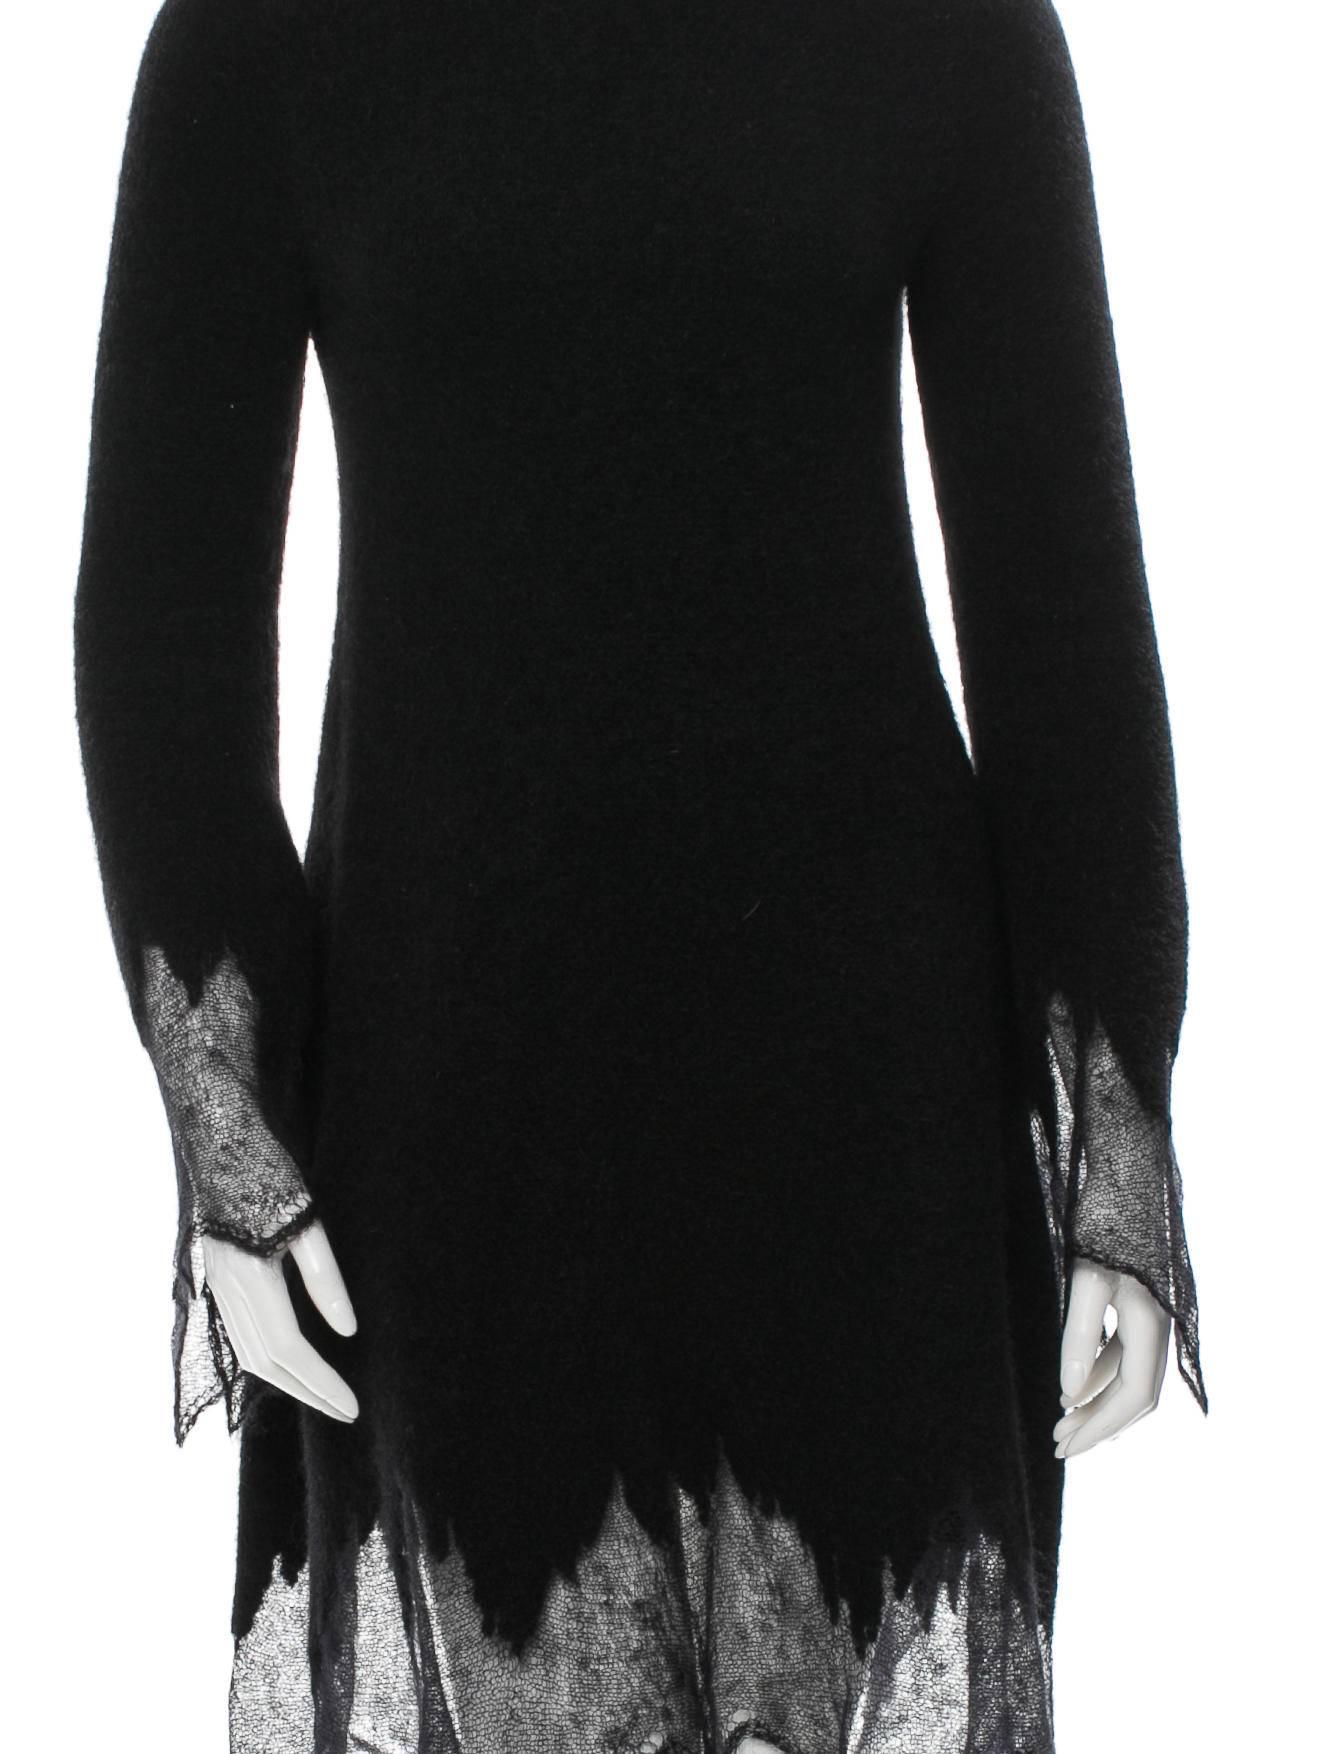 CURATOR'S NOTES

WHOA! PRICE REDUCED THIS WEEKEND ONLY!

Go from the office to date night with this unique black Chanel long sleeve dress. Featuring a sexy asymmetric sheer hem and keyhole at back, he will approve.

Style tip: Adorn the